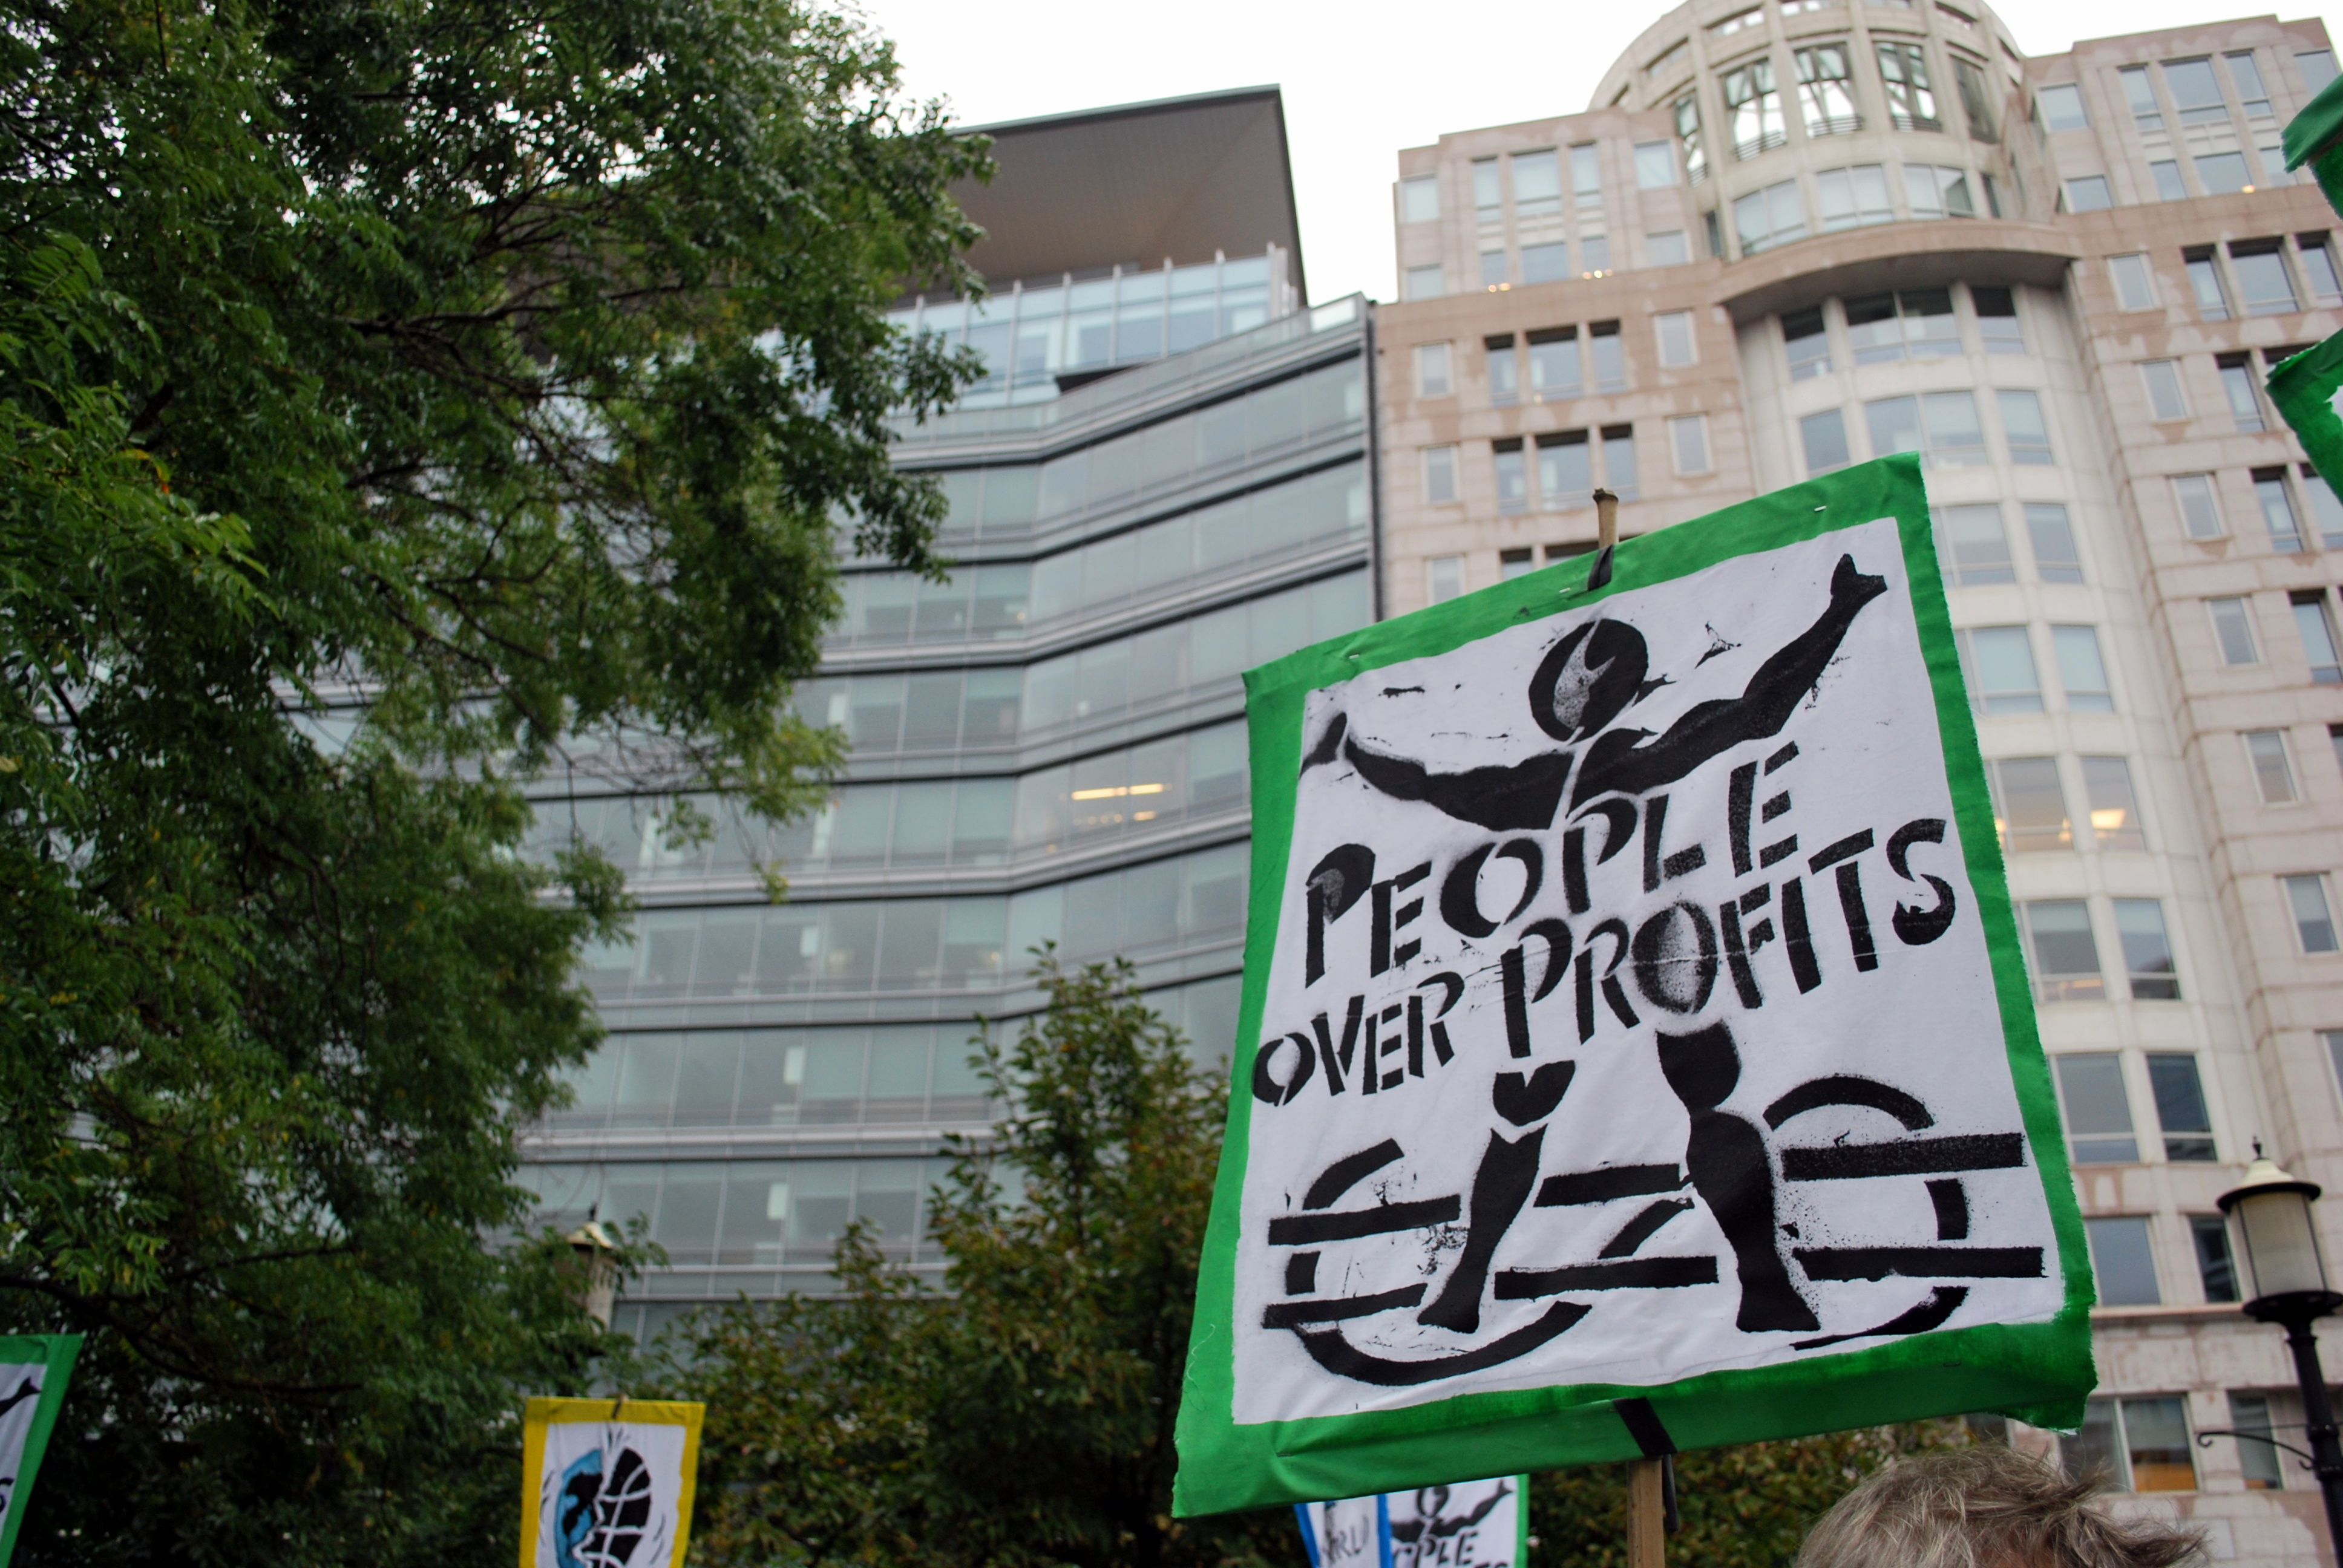 Sign at protest: People over profits